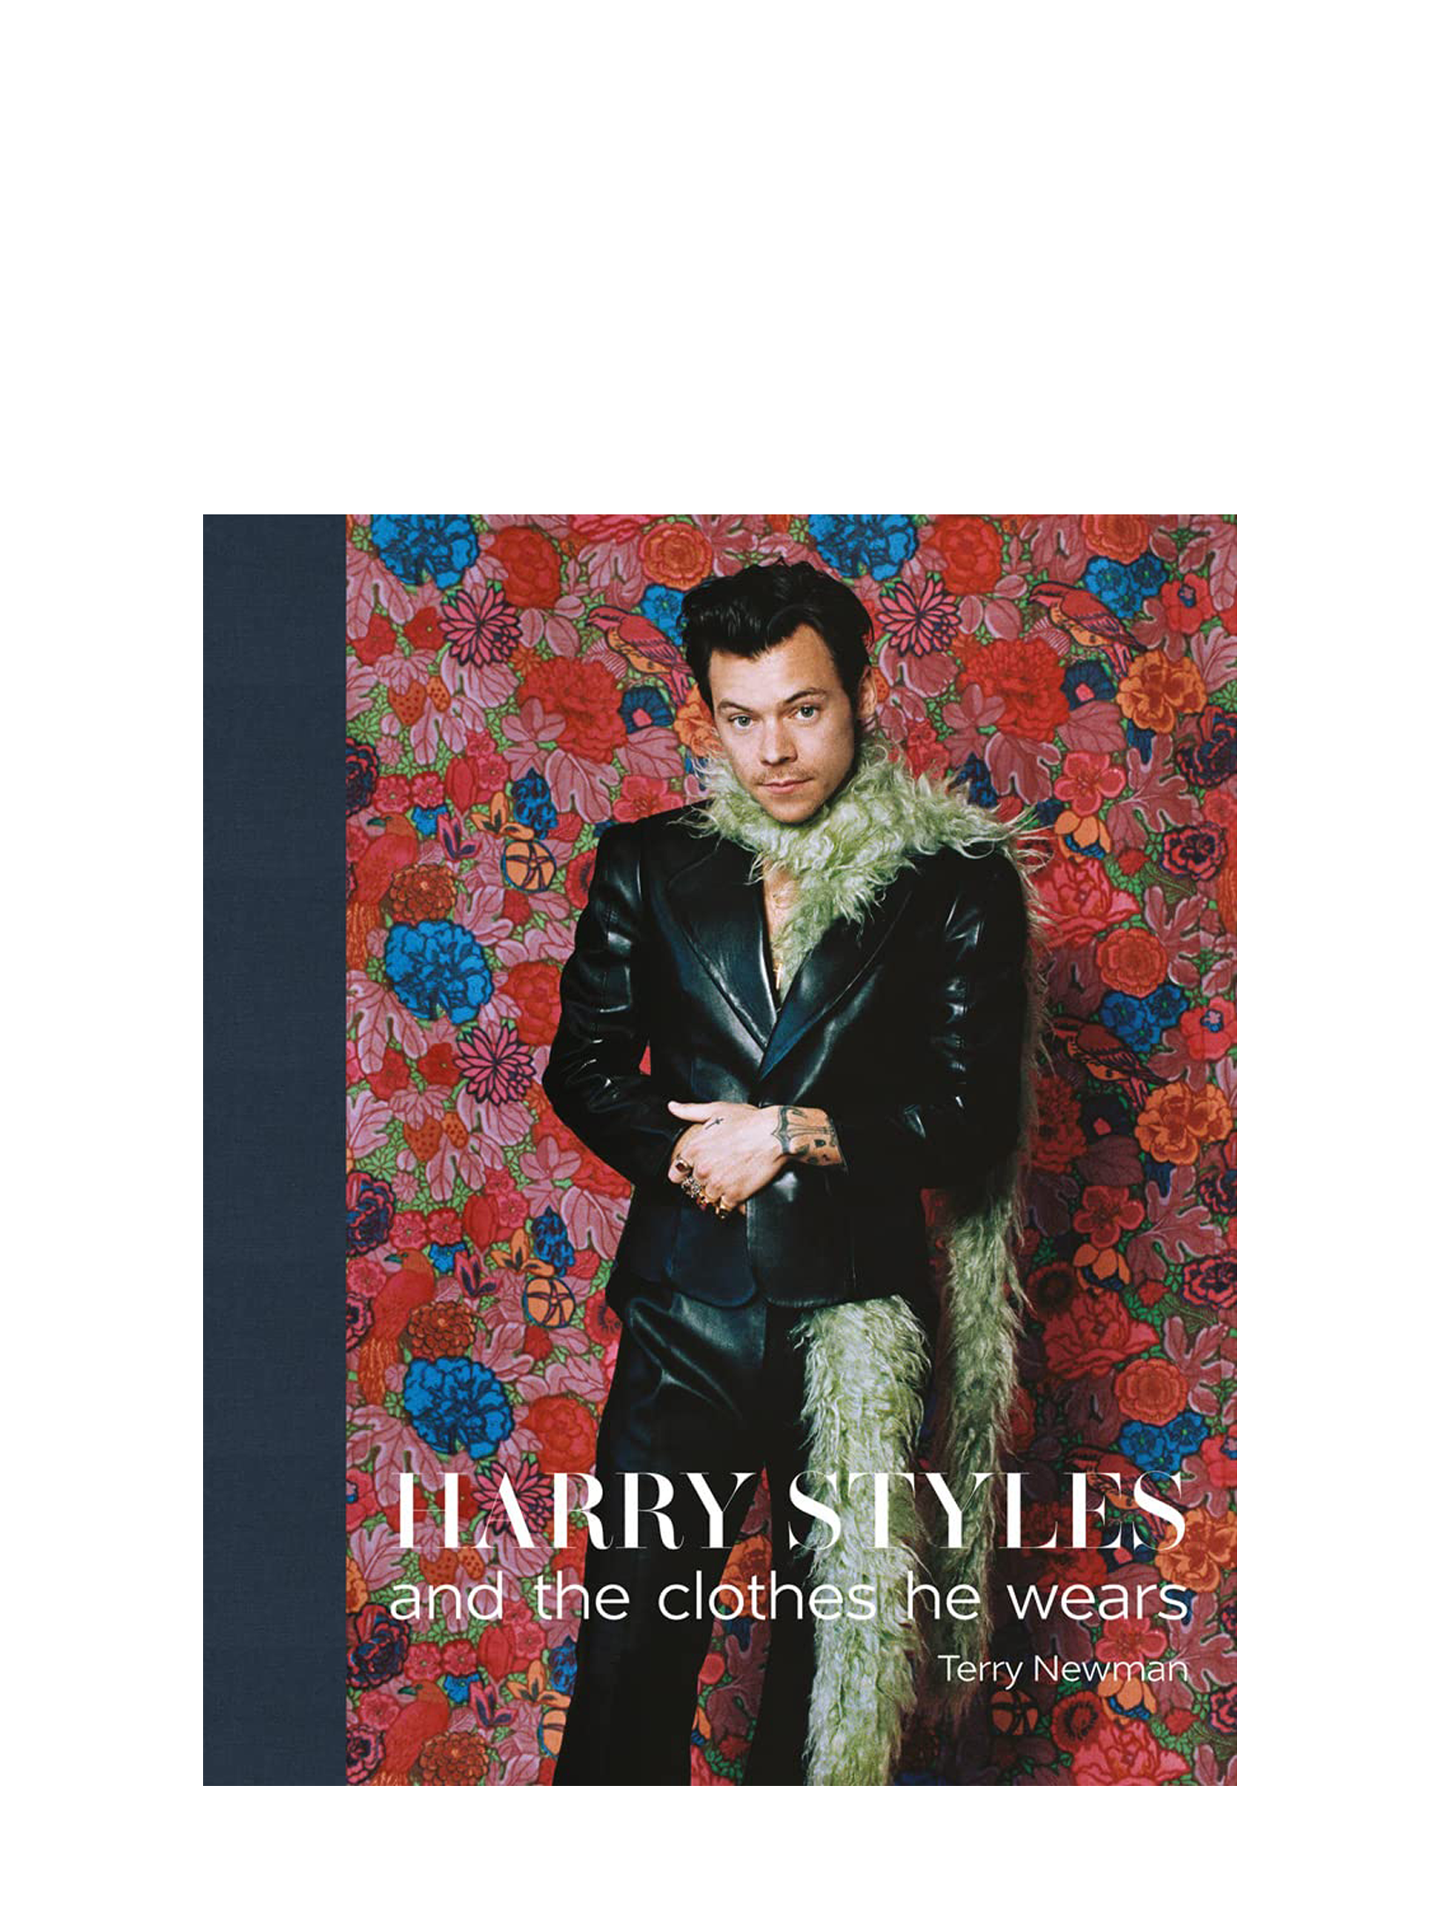 Harry Styles: And the clothes he wears